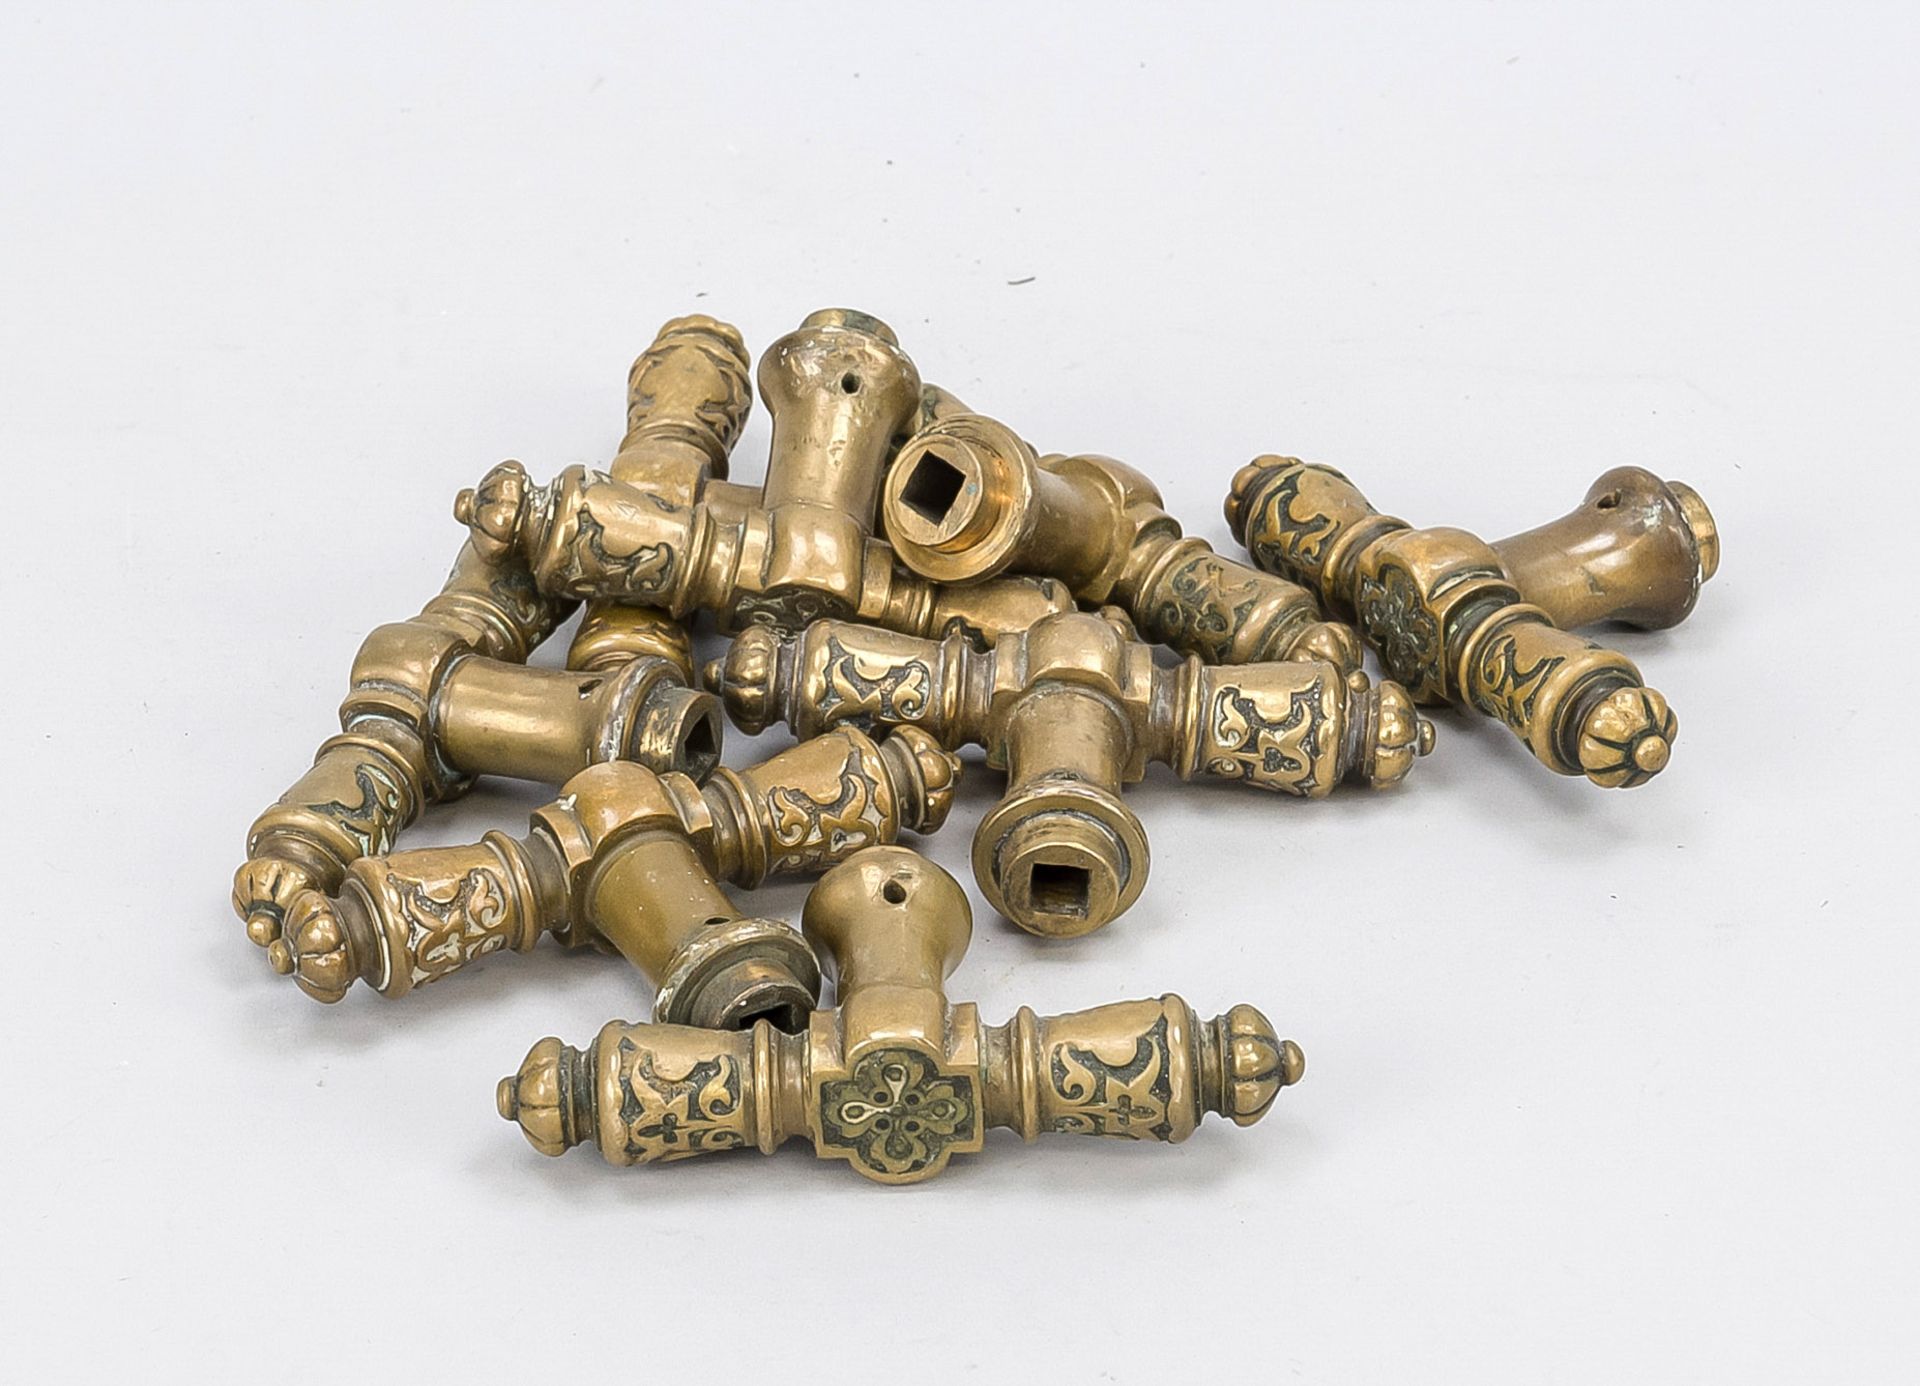 8 window handles, late 19th century, brass, profiled and ornamented, width 10.5 cm each